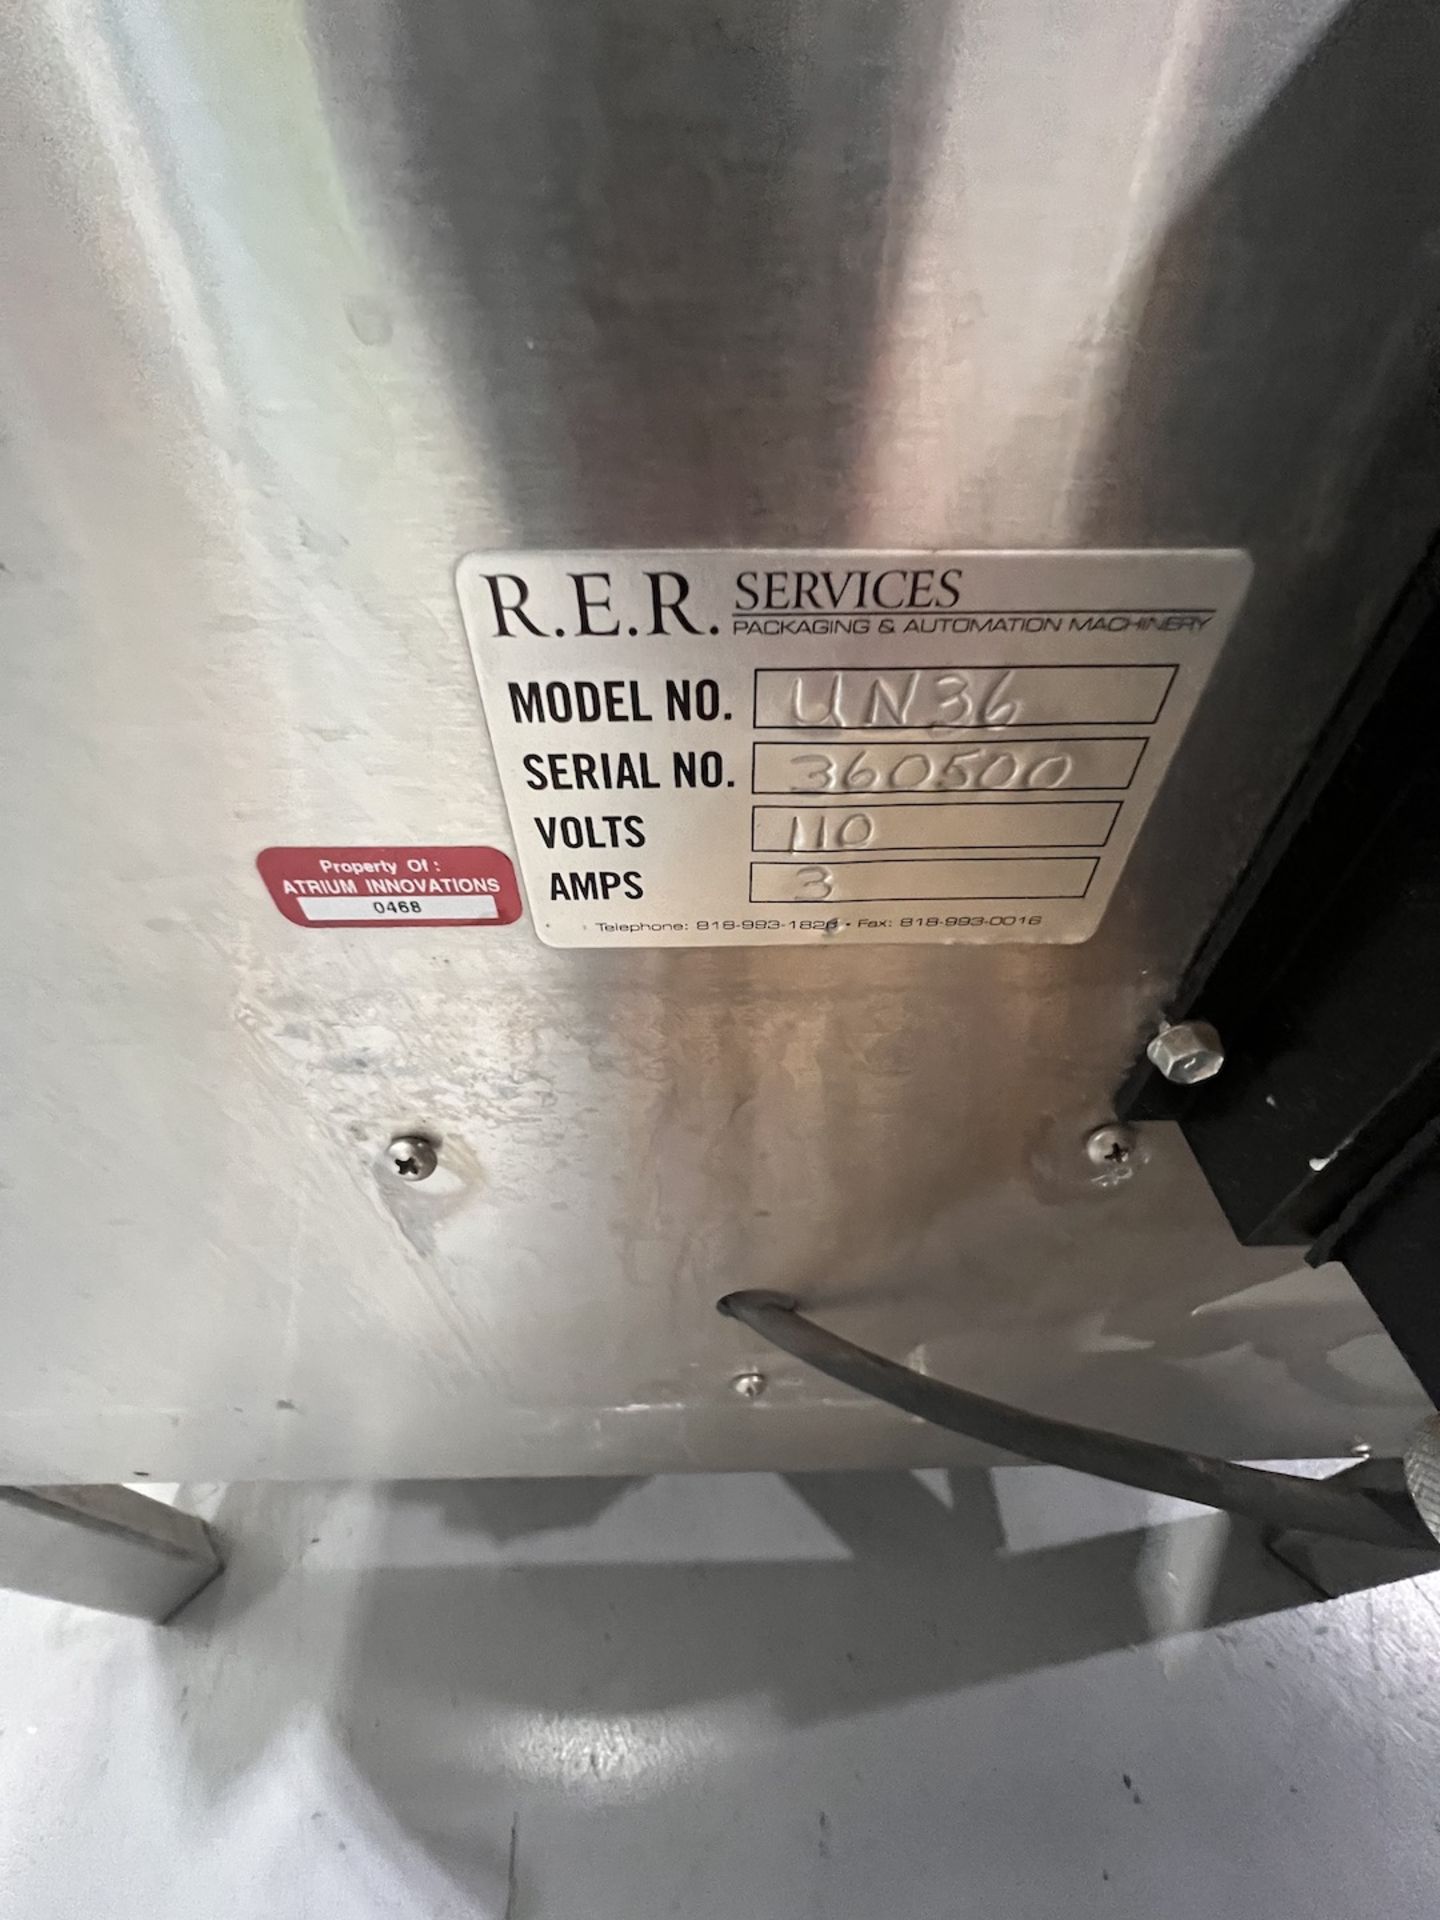 R.E.R. S/S ROTARY ACCUMULATION TABLE, MODEL UN 36, S/N 360500, LEESON SPEEDMASTER VARIABLE SPEED - Image 2 of 5